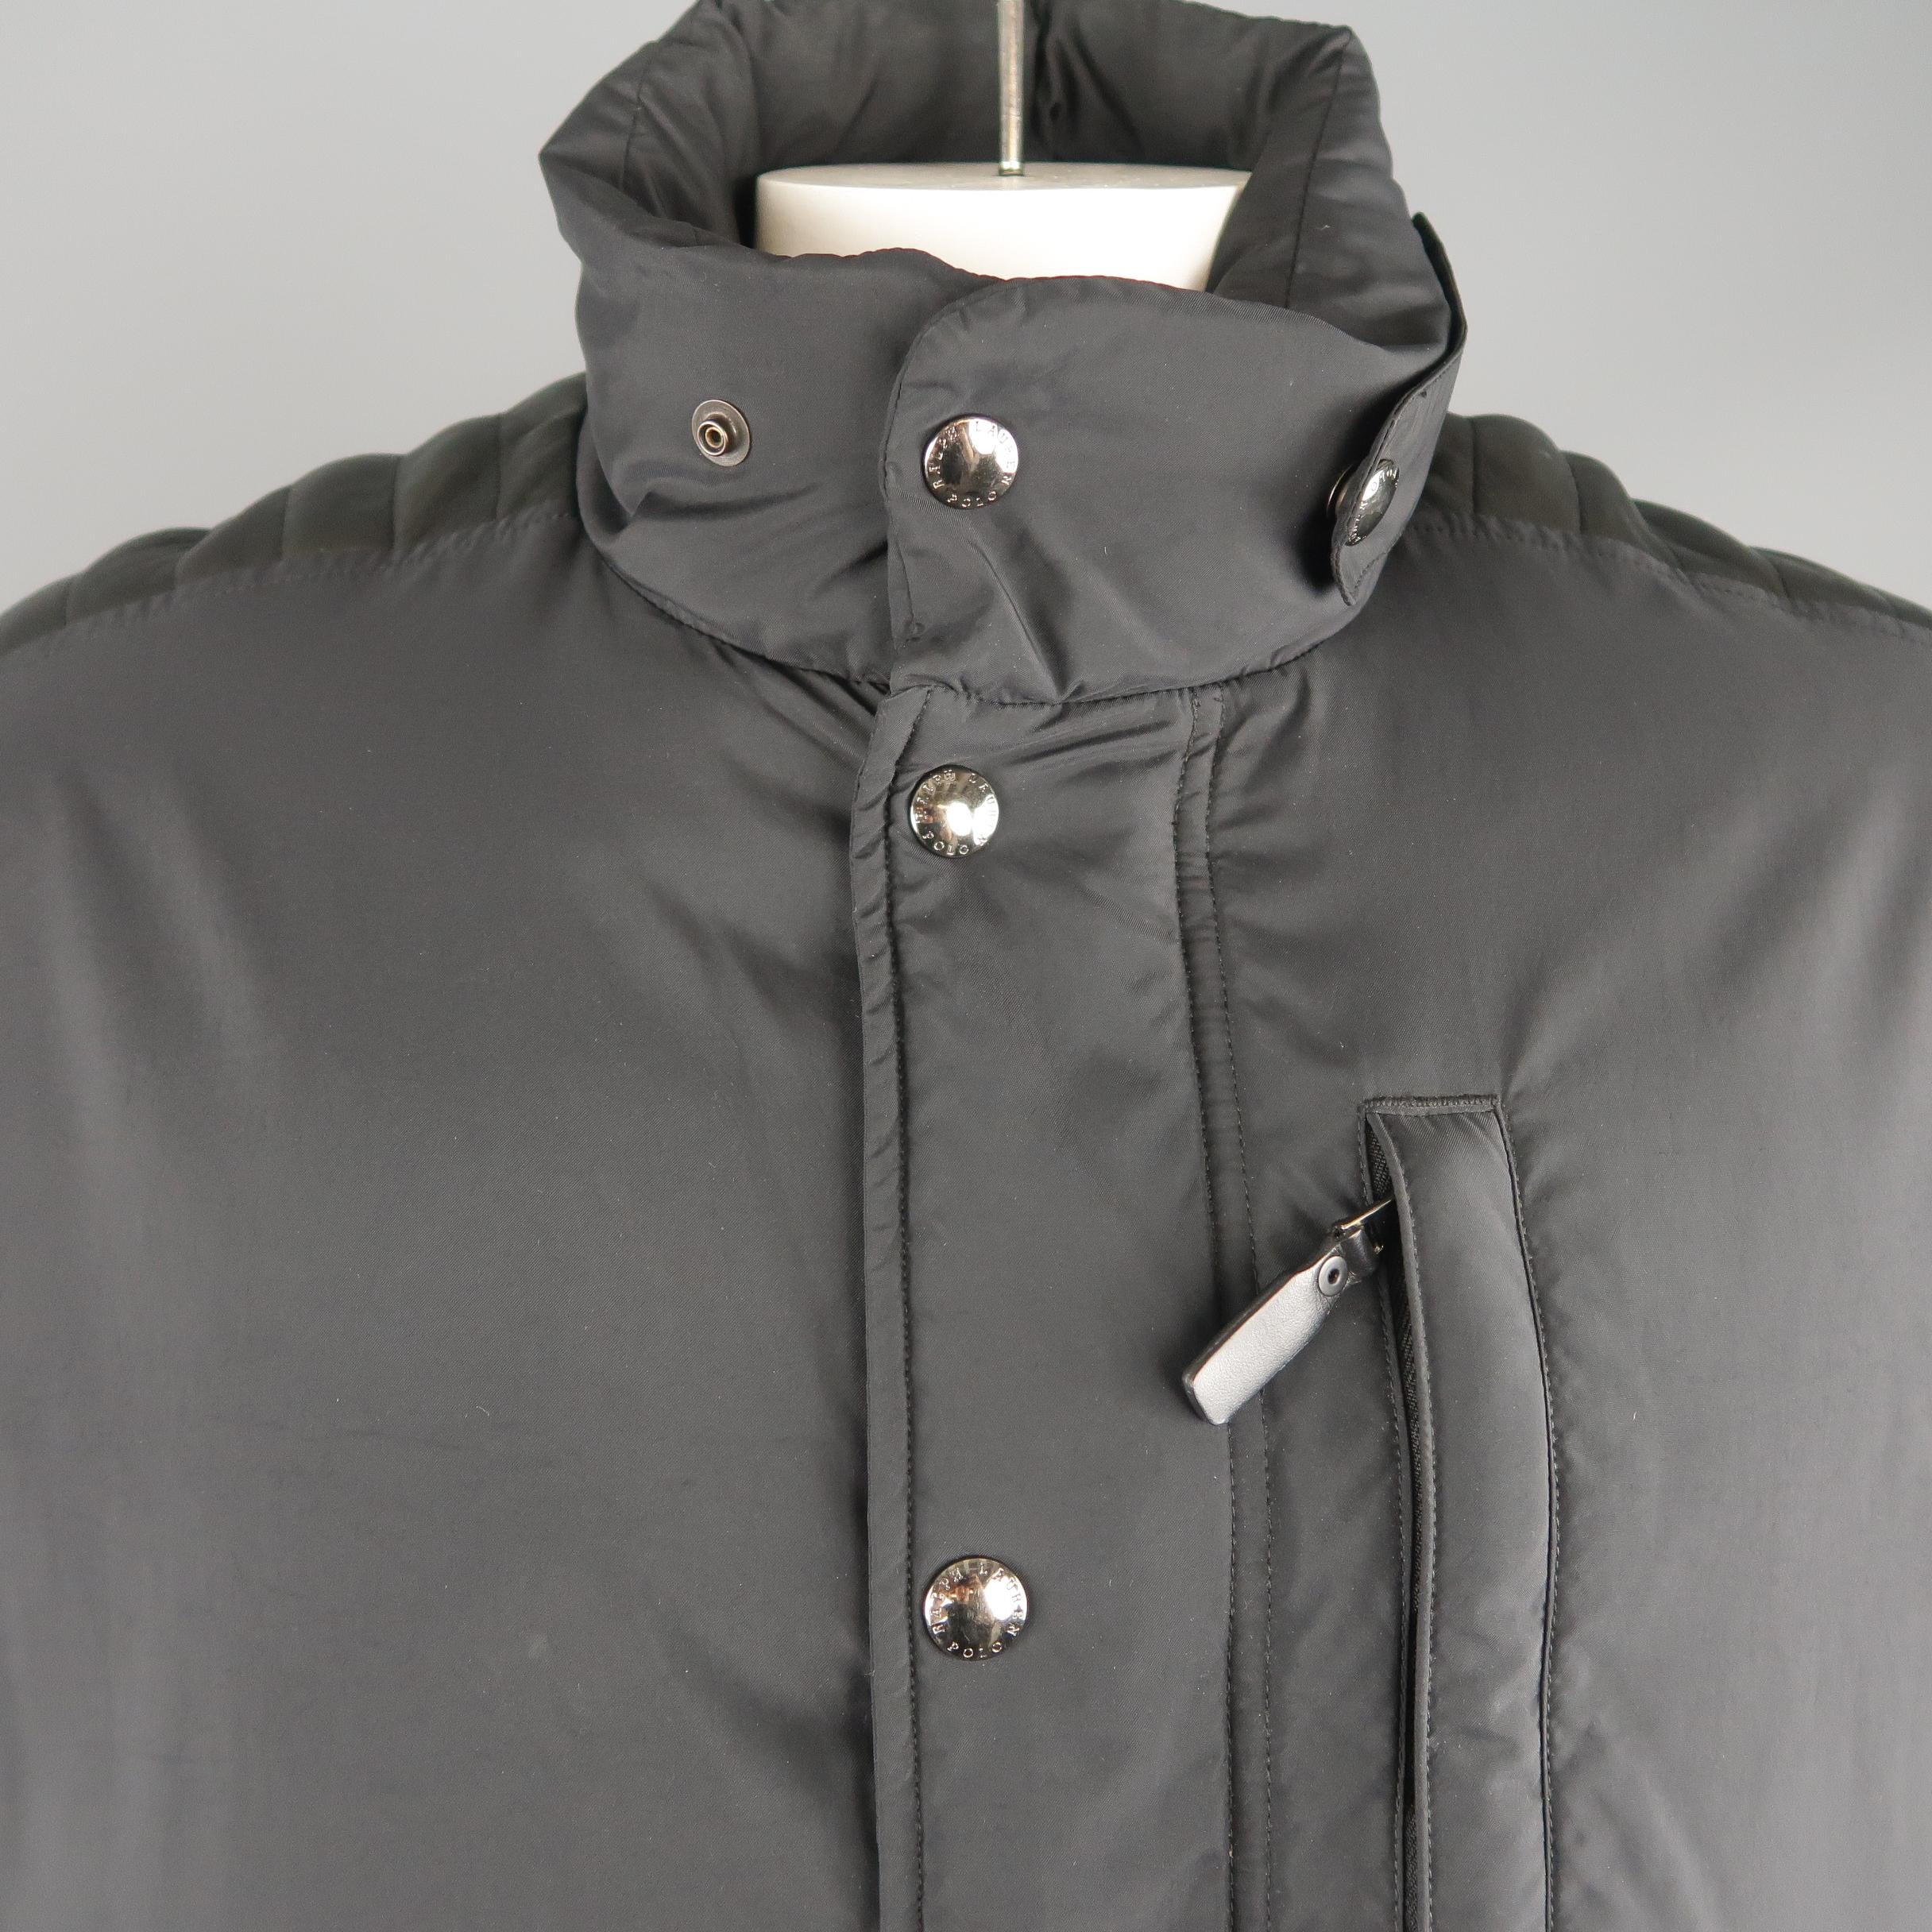 POLO RALPH LAUREN down filled puffer jacket comes in black quilted nylon with a high collar, zip closure with hidden snap placket zip pockets, quilted leather arm stripe, and red perforated leather underarm panel.
 
Excellent Pre-Owned